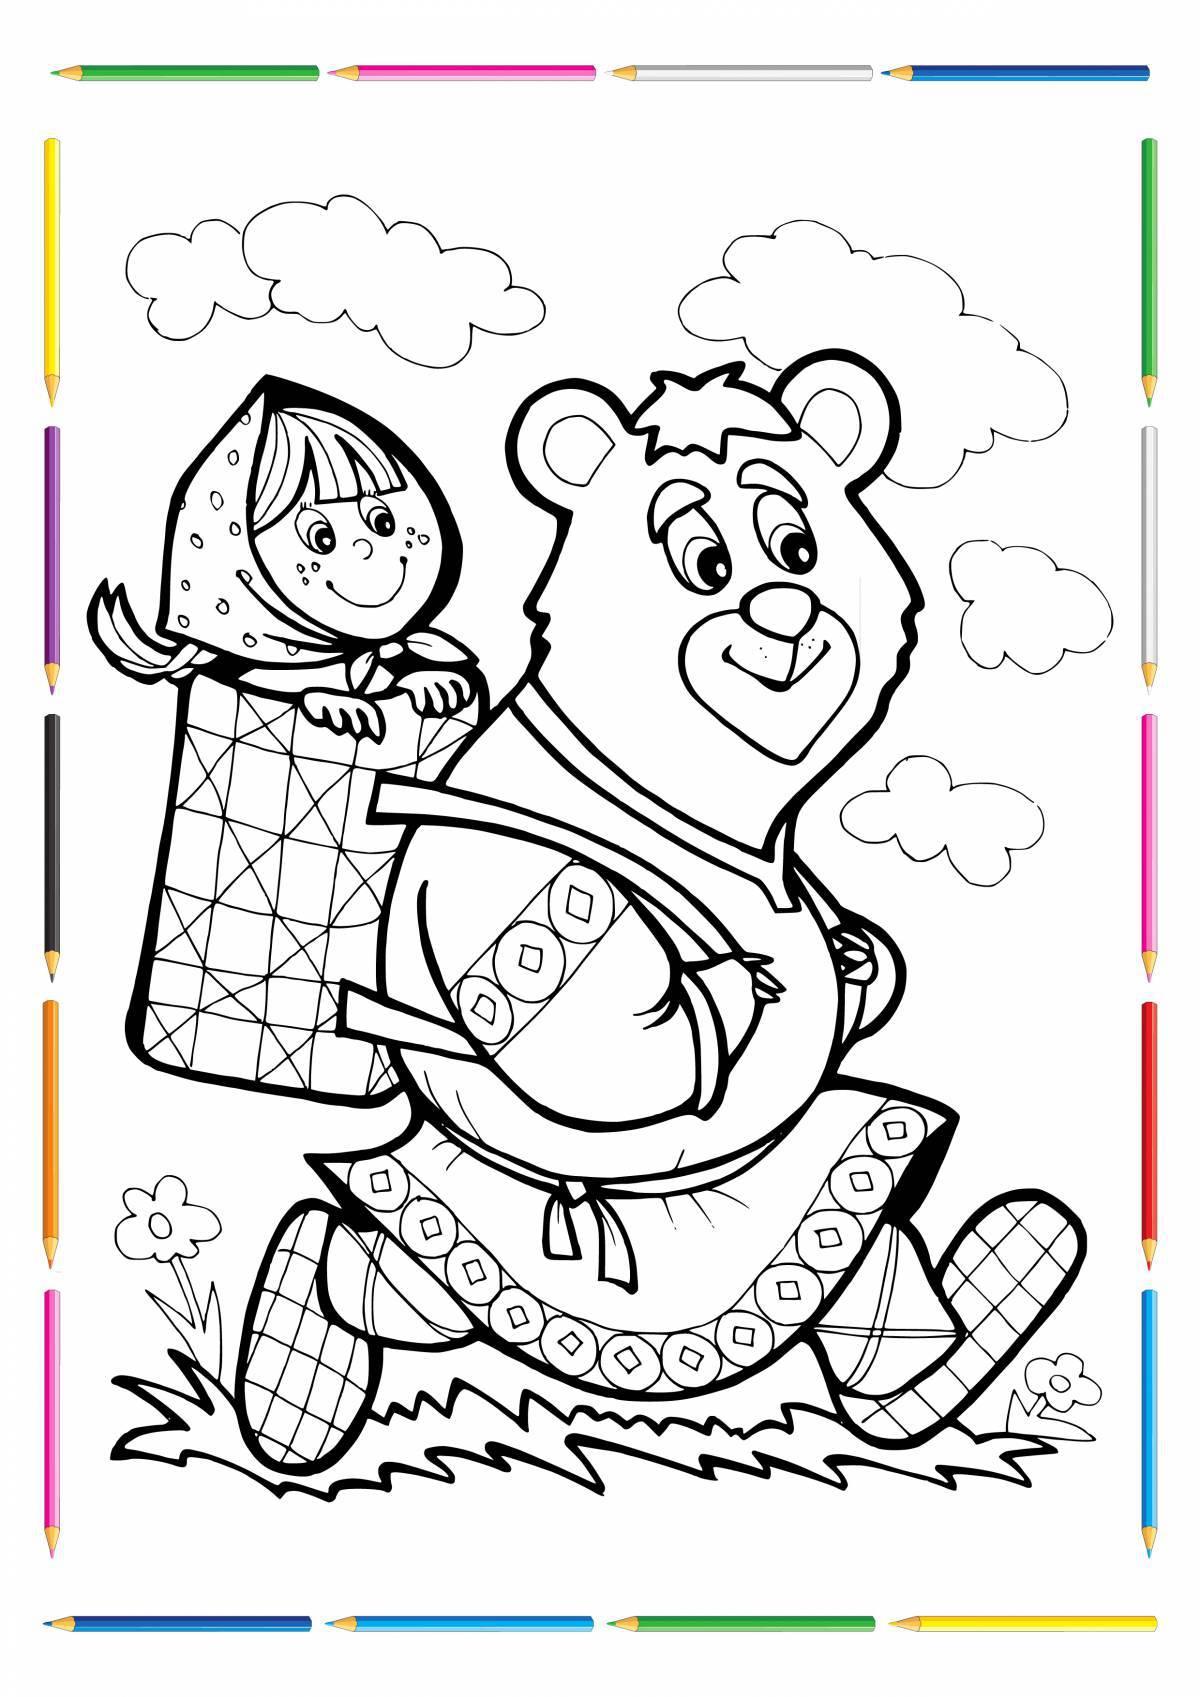 Thought-provoking fairy tale coloring pages